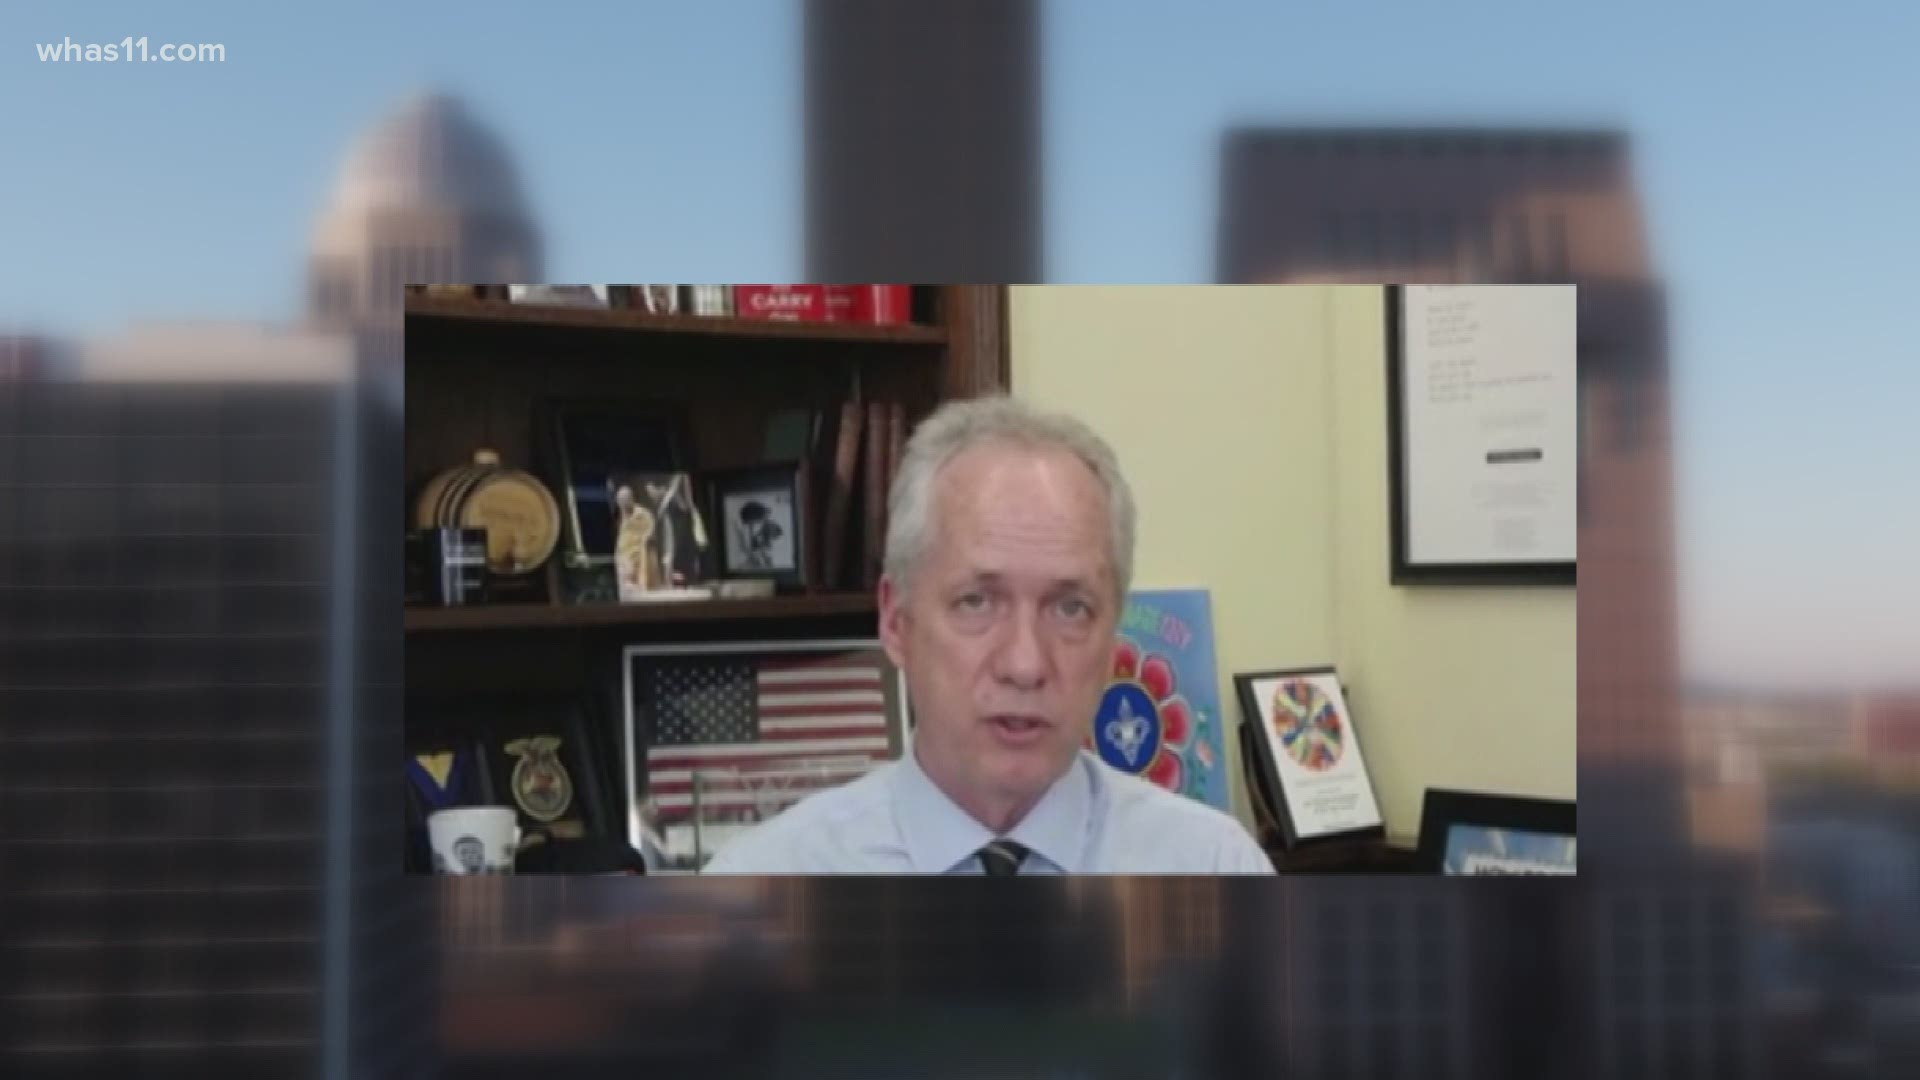 Louisville Mayor Greg Fischer said he will 'never apologize for being anti-racism...and for believing that every citizen deserves to be treated.'